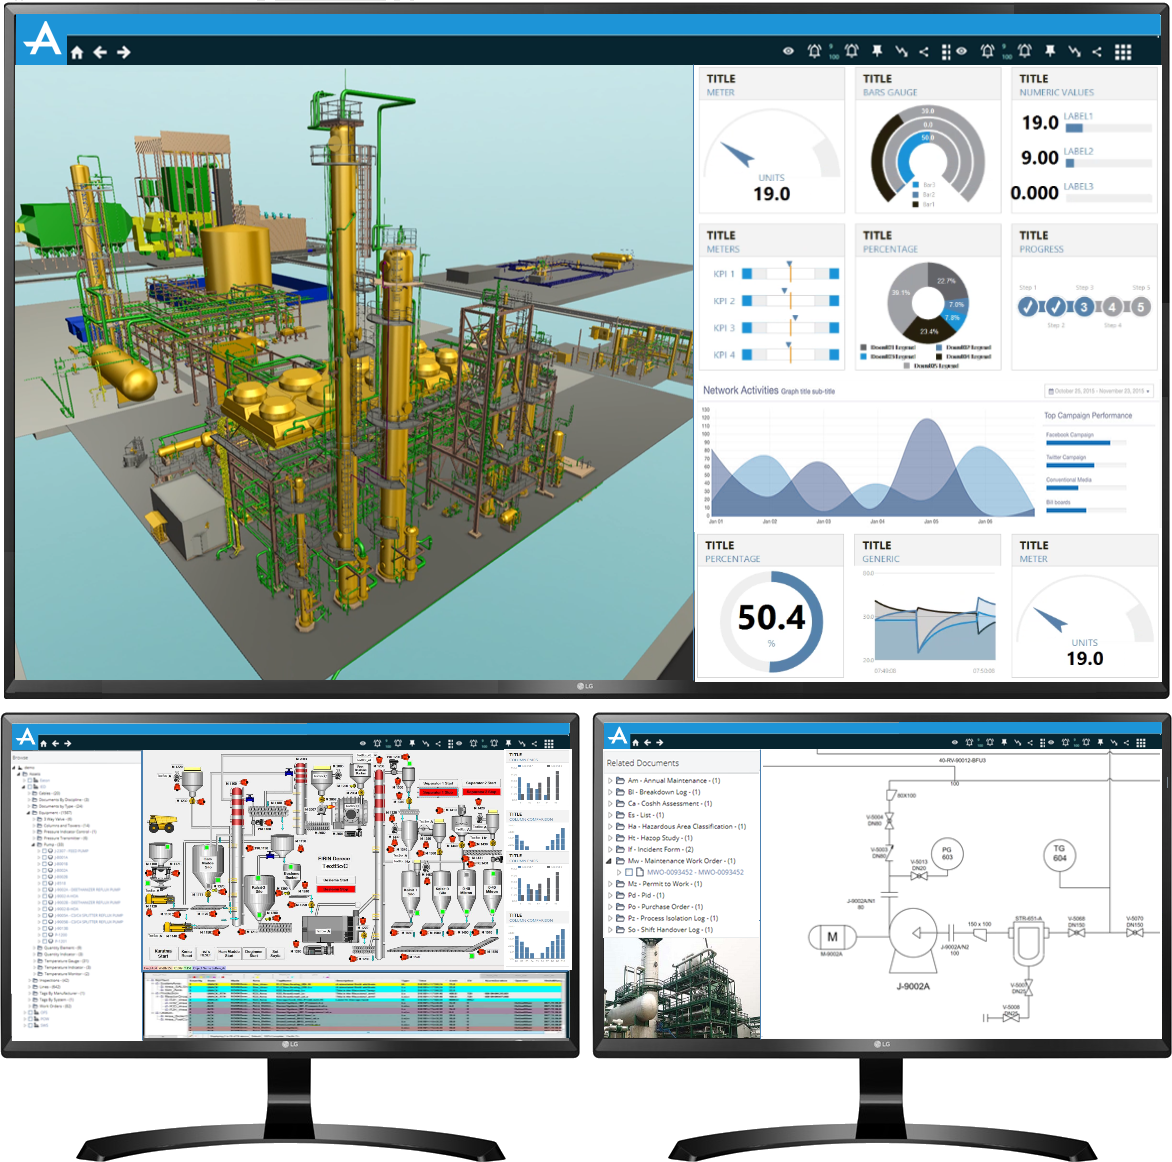 Assets in the digital twin paired with real-time process data from automation and control systems